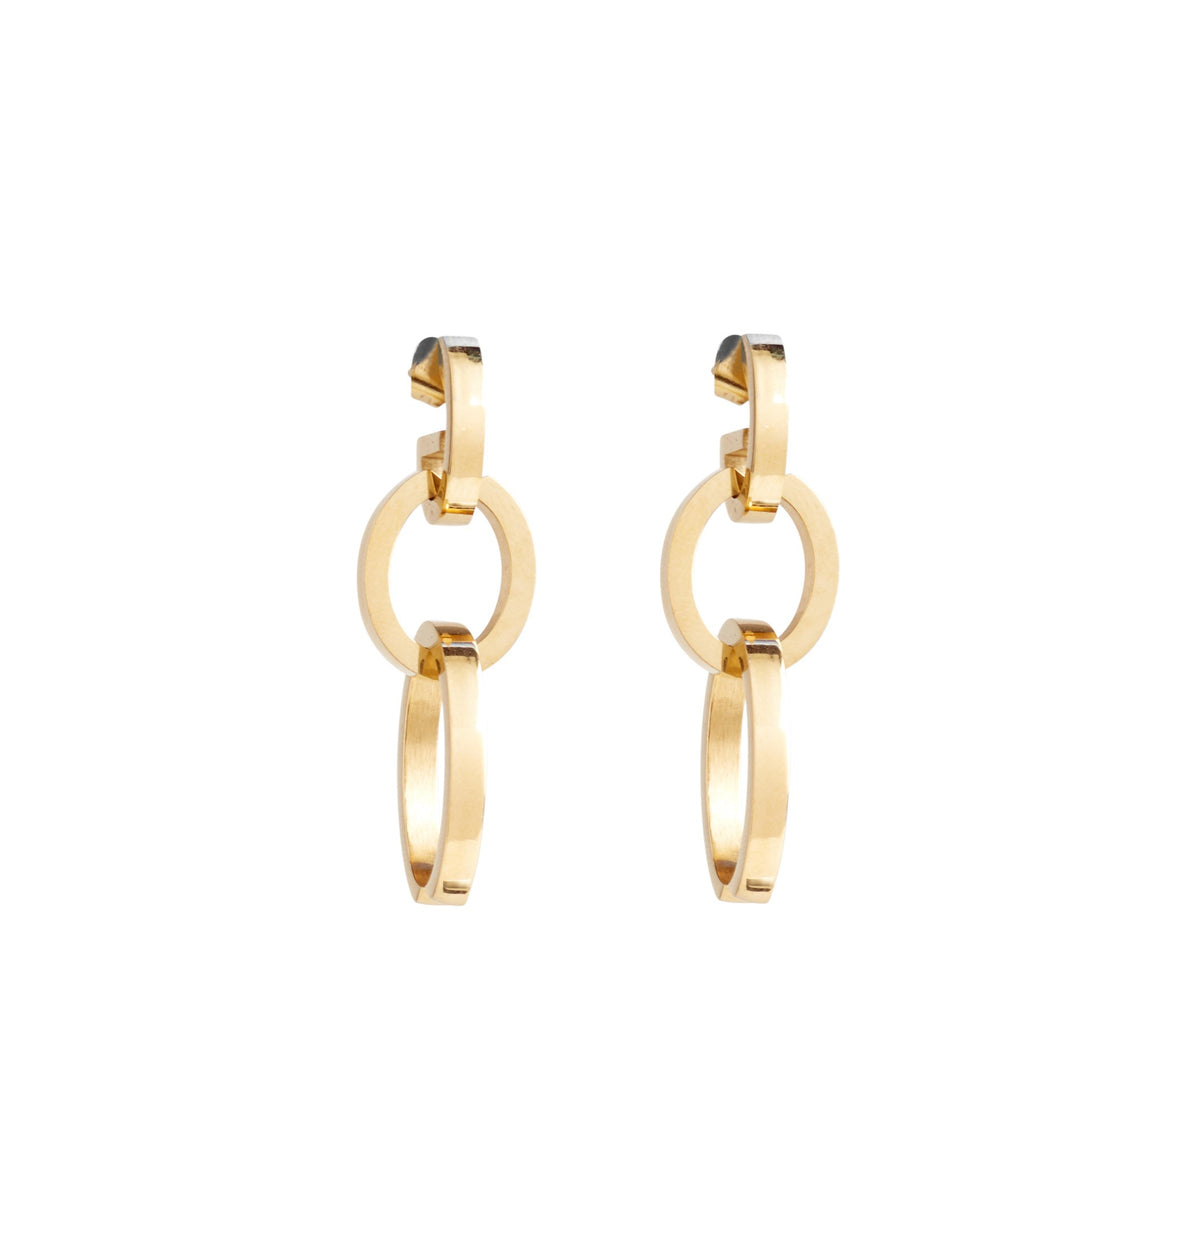 Cassio Earrings – CURATEUR